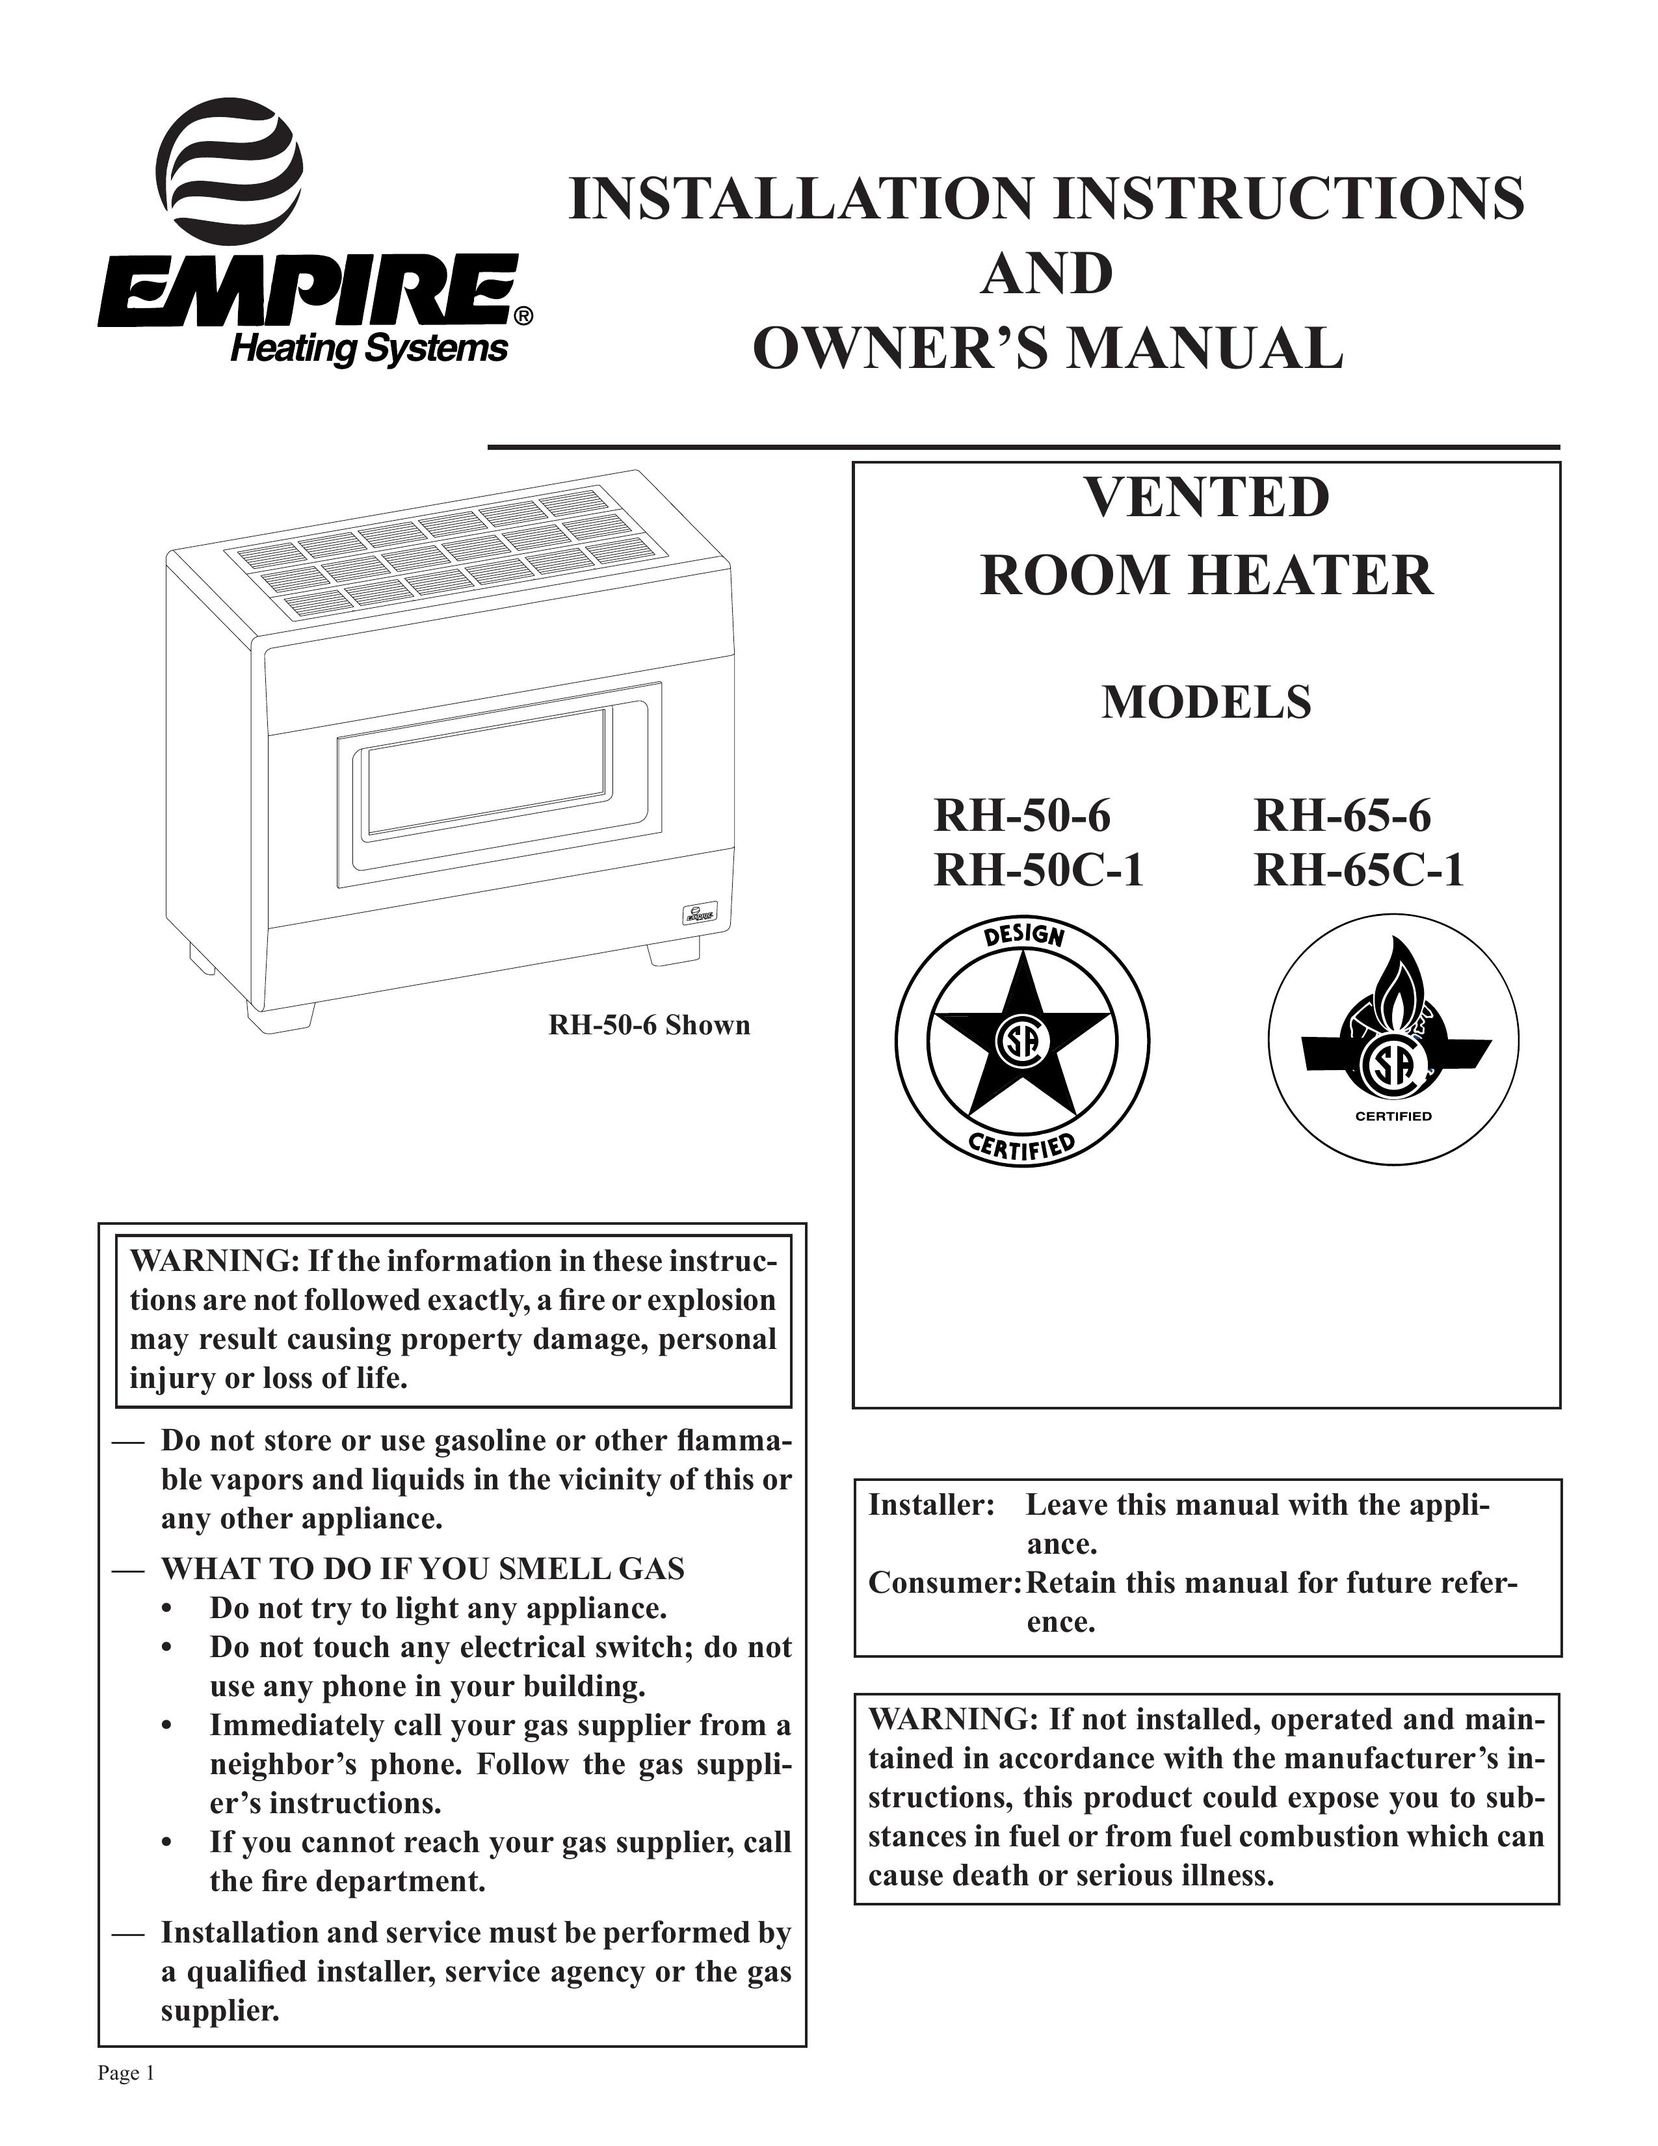 Empire Comfort Systems RH-65-6 Electric Heater User Manual